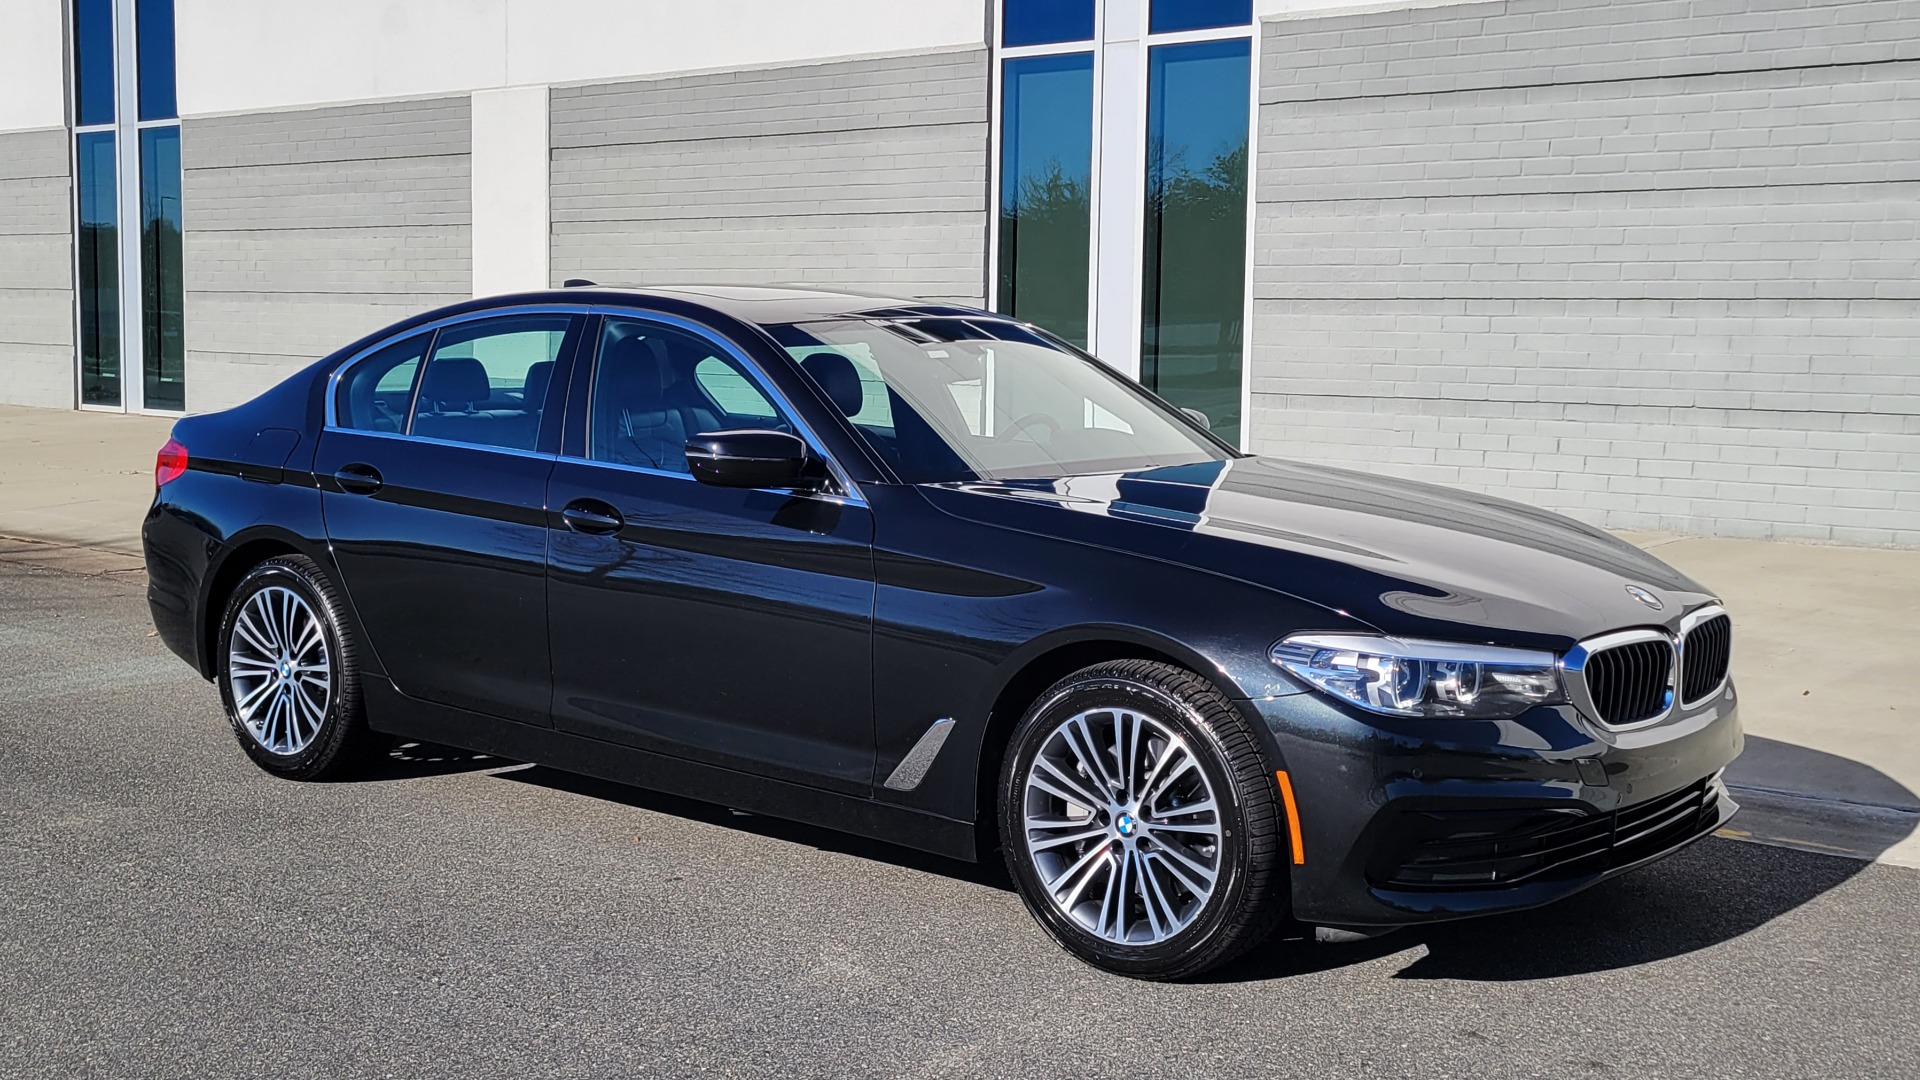 Used 2019 BMW 5 SERIES 530I XDRIVE CONVENIENCE PKG / NAV / SUNROOF / REARVIEW for sale $41,595 at Formula Imports in Charlotte NC 28227 5